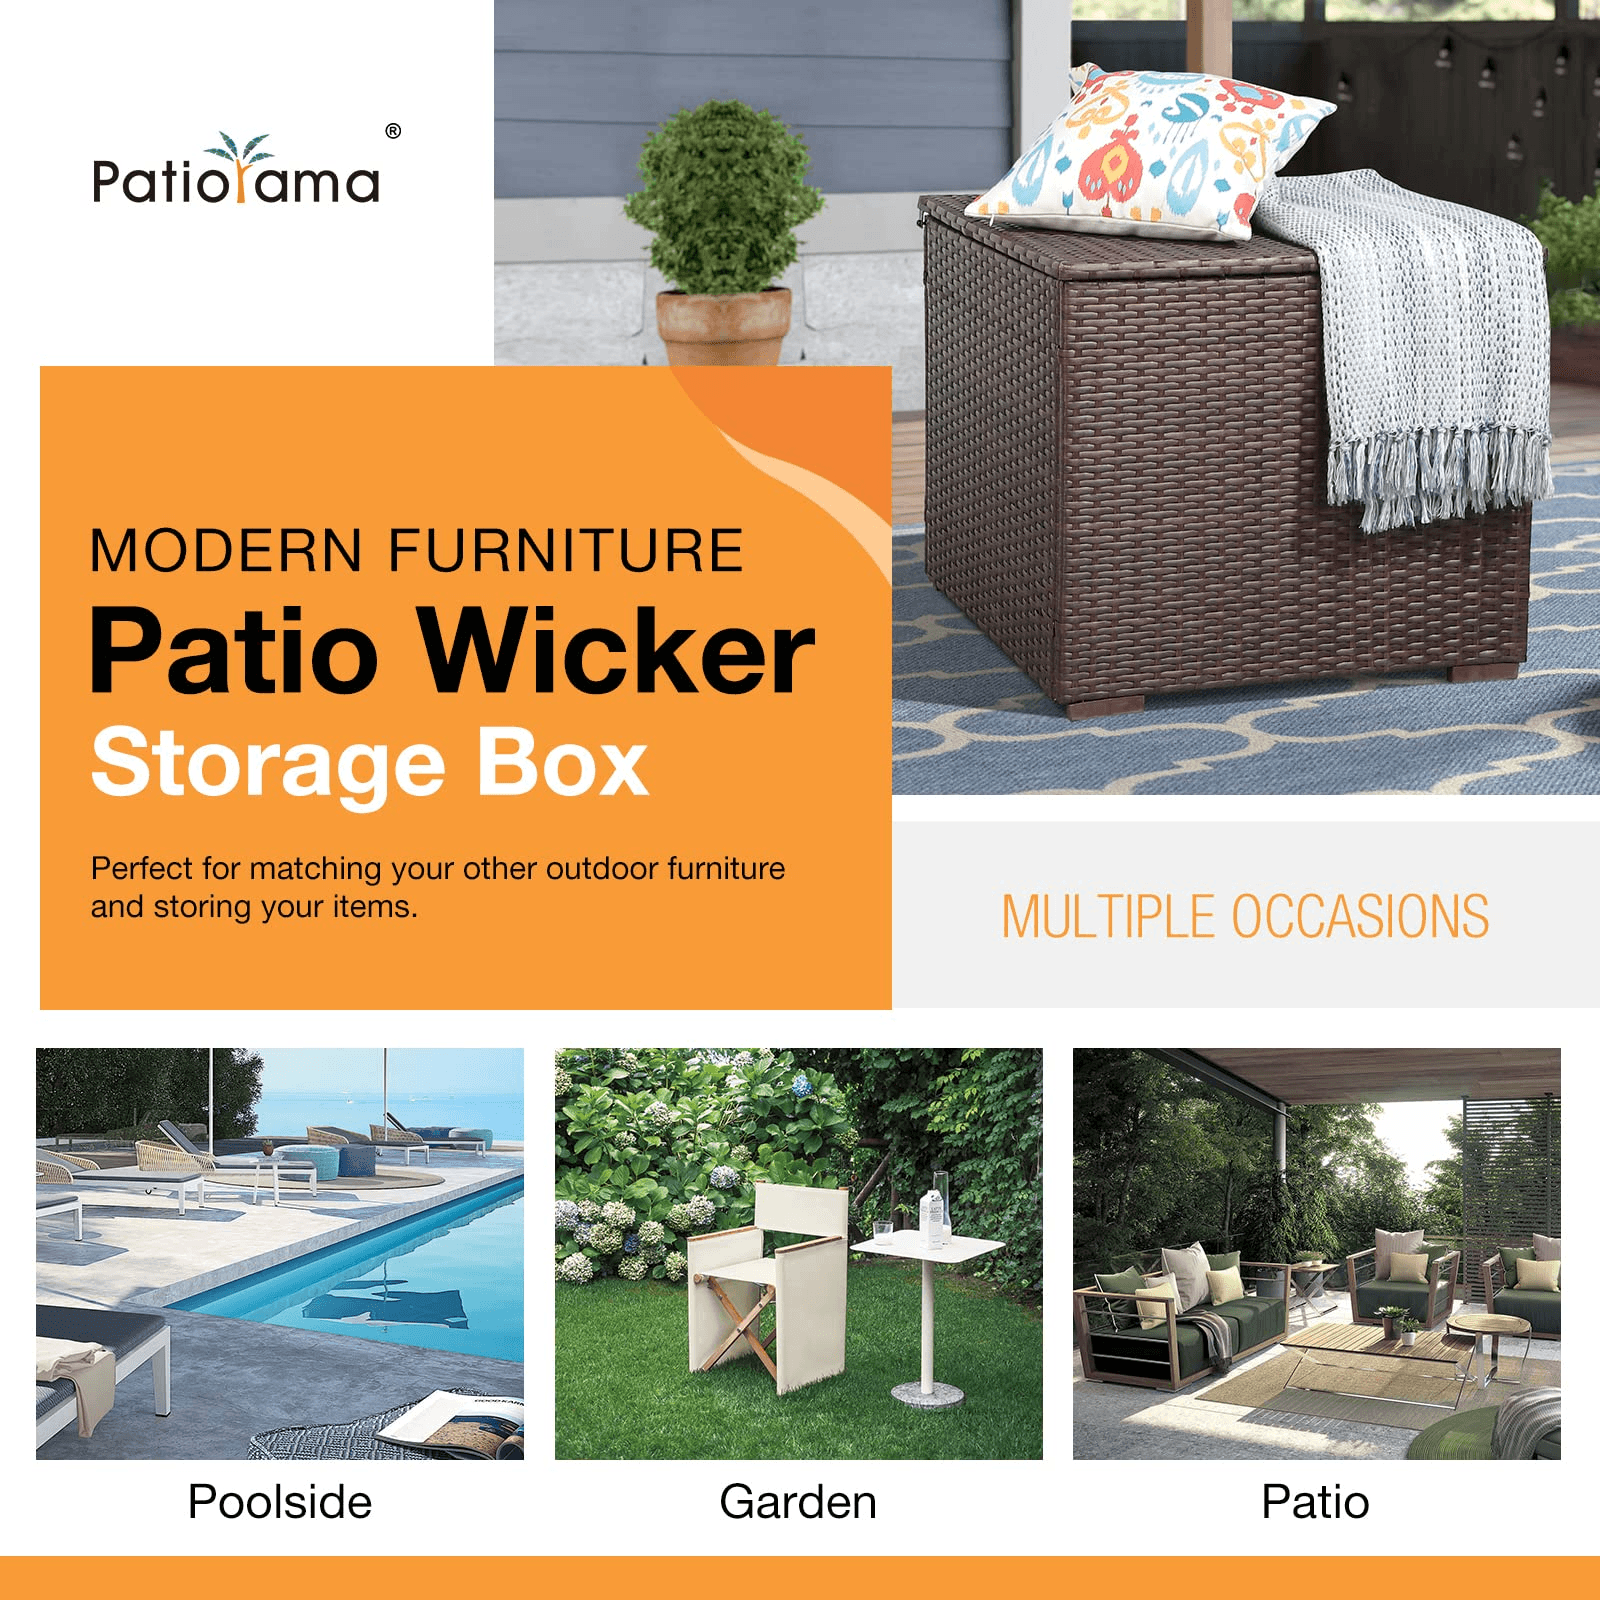 Deck boxes are the ultimate outdoor storage for your backyard